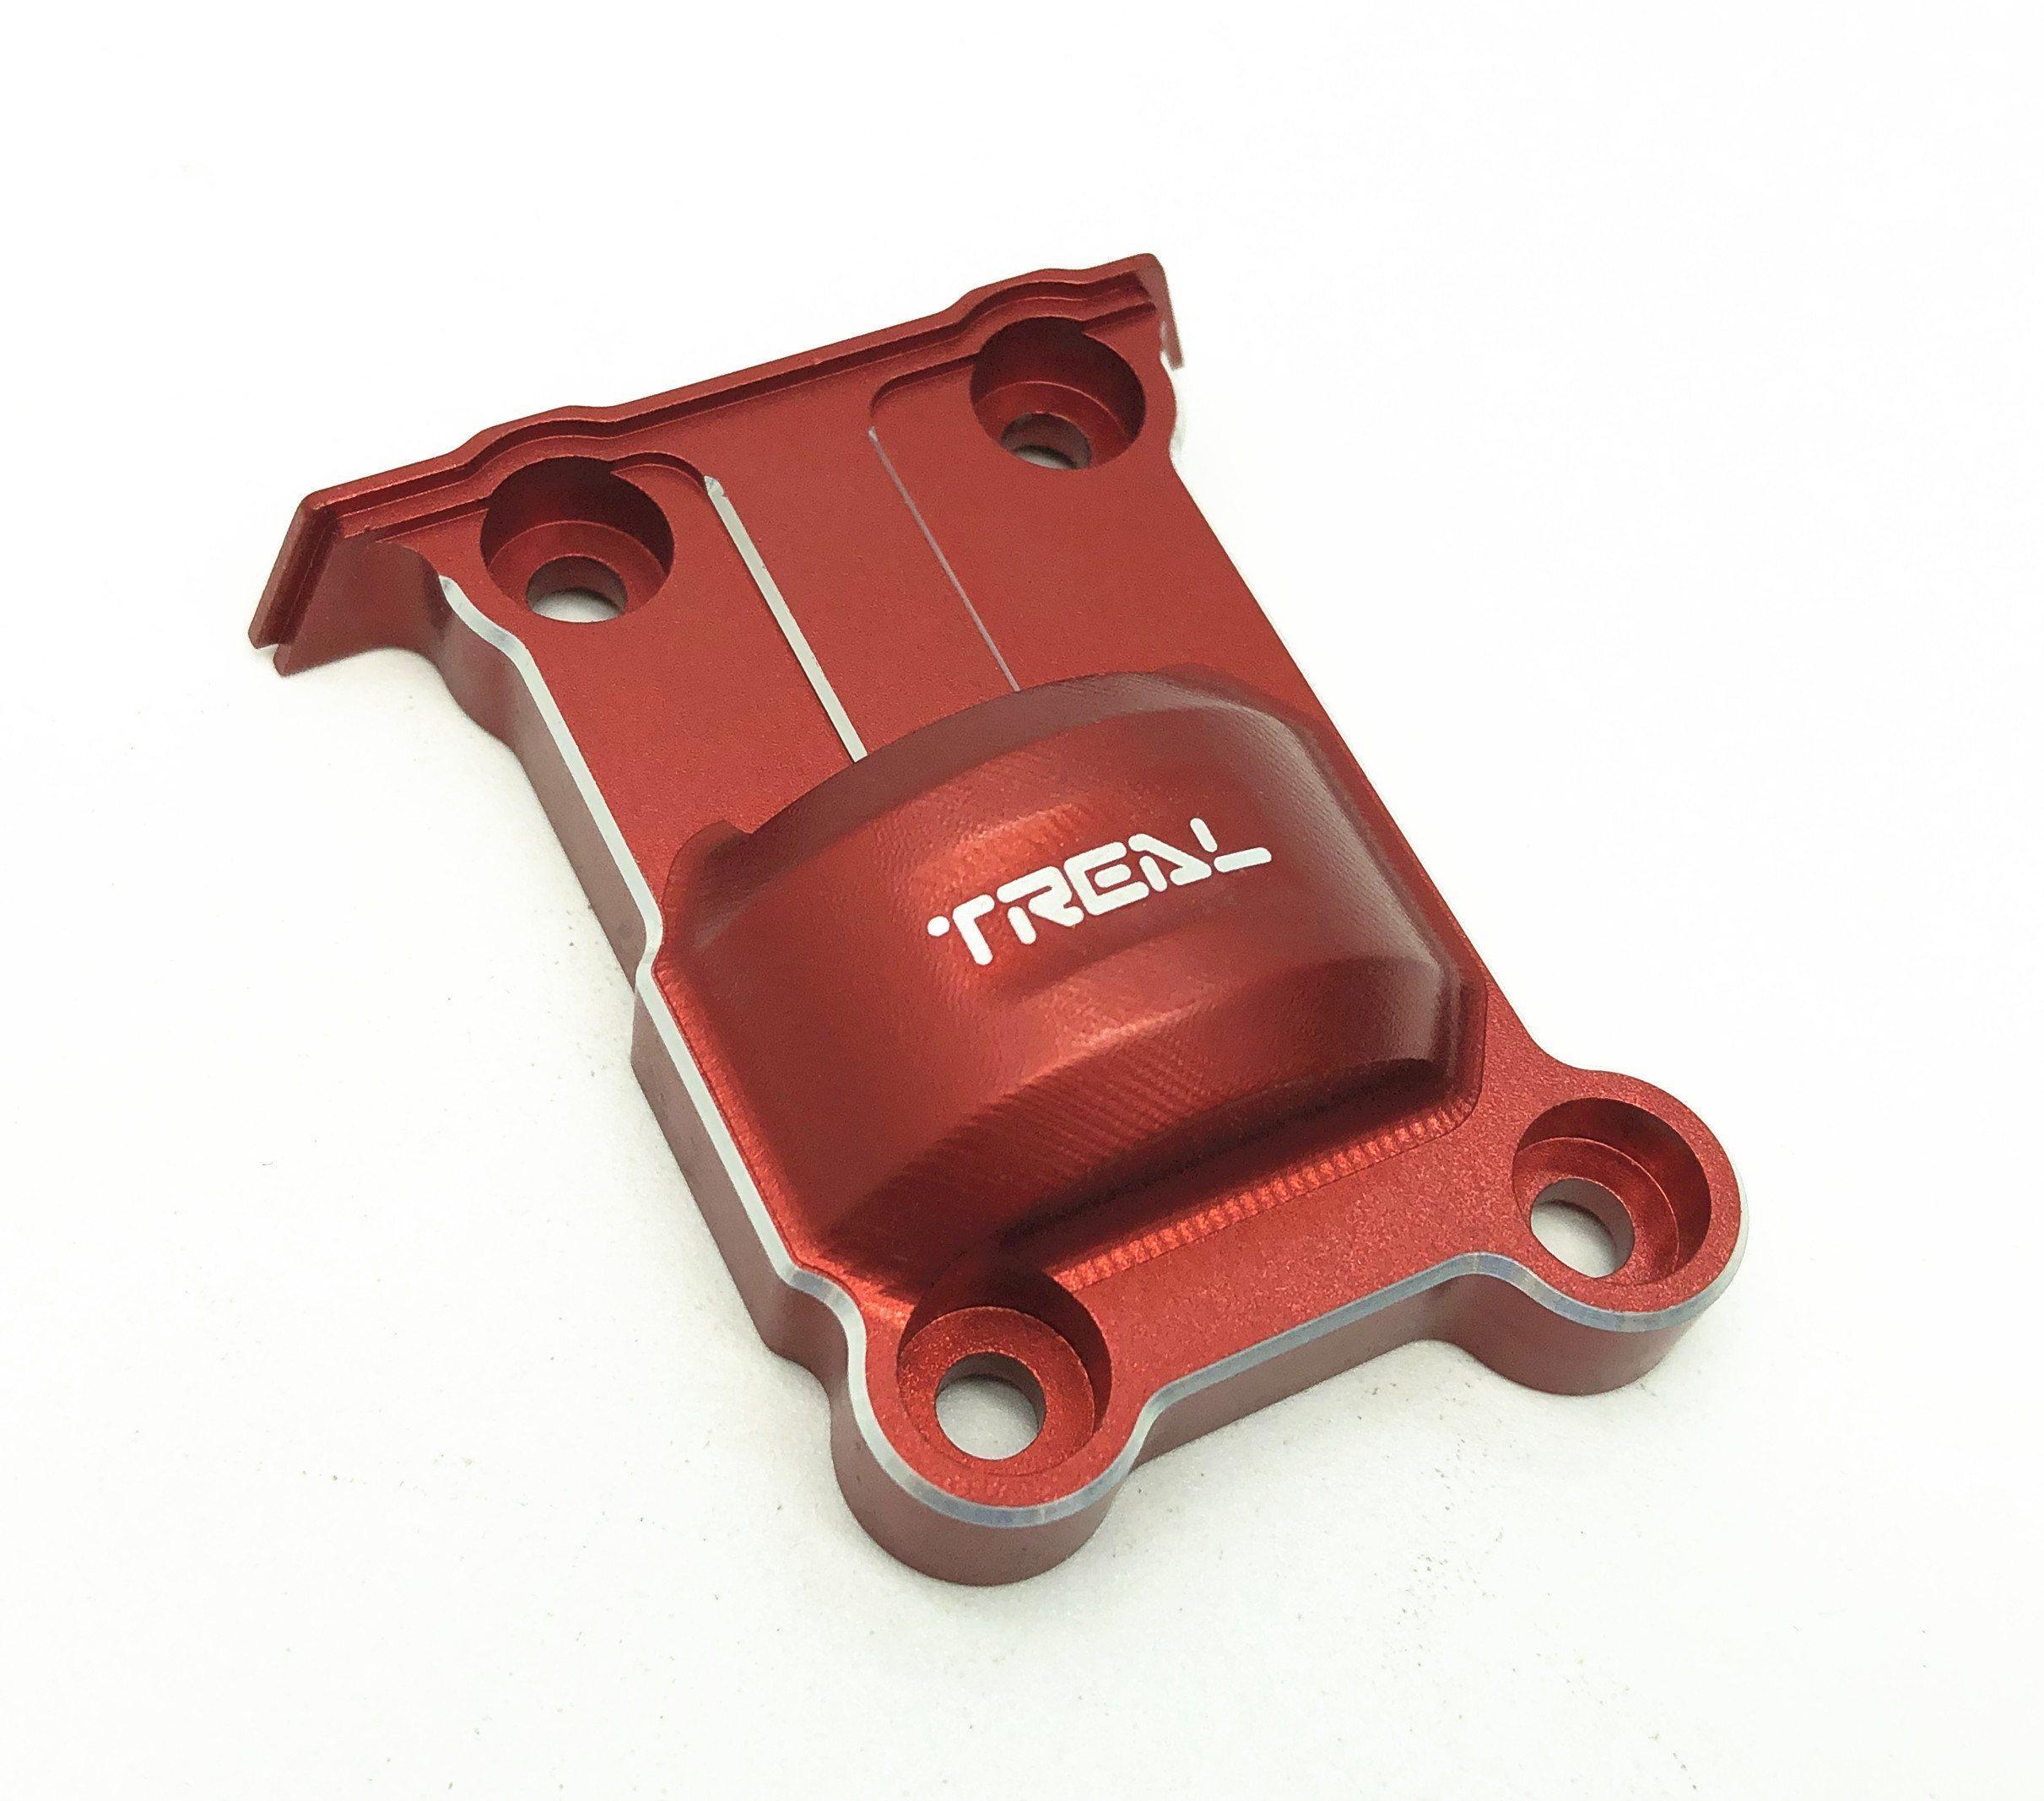 Treal Aluminum 7075 CNC Billet Machined Rear Lower Gear Cover for X-MAXX (Red) ...